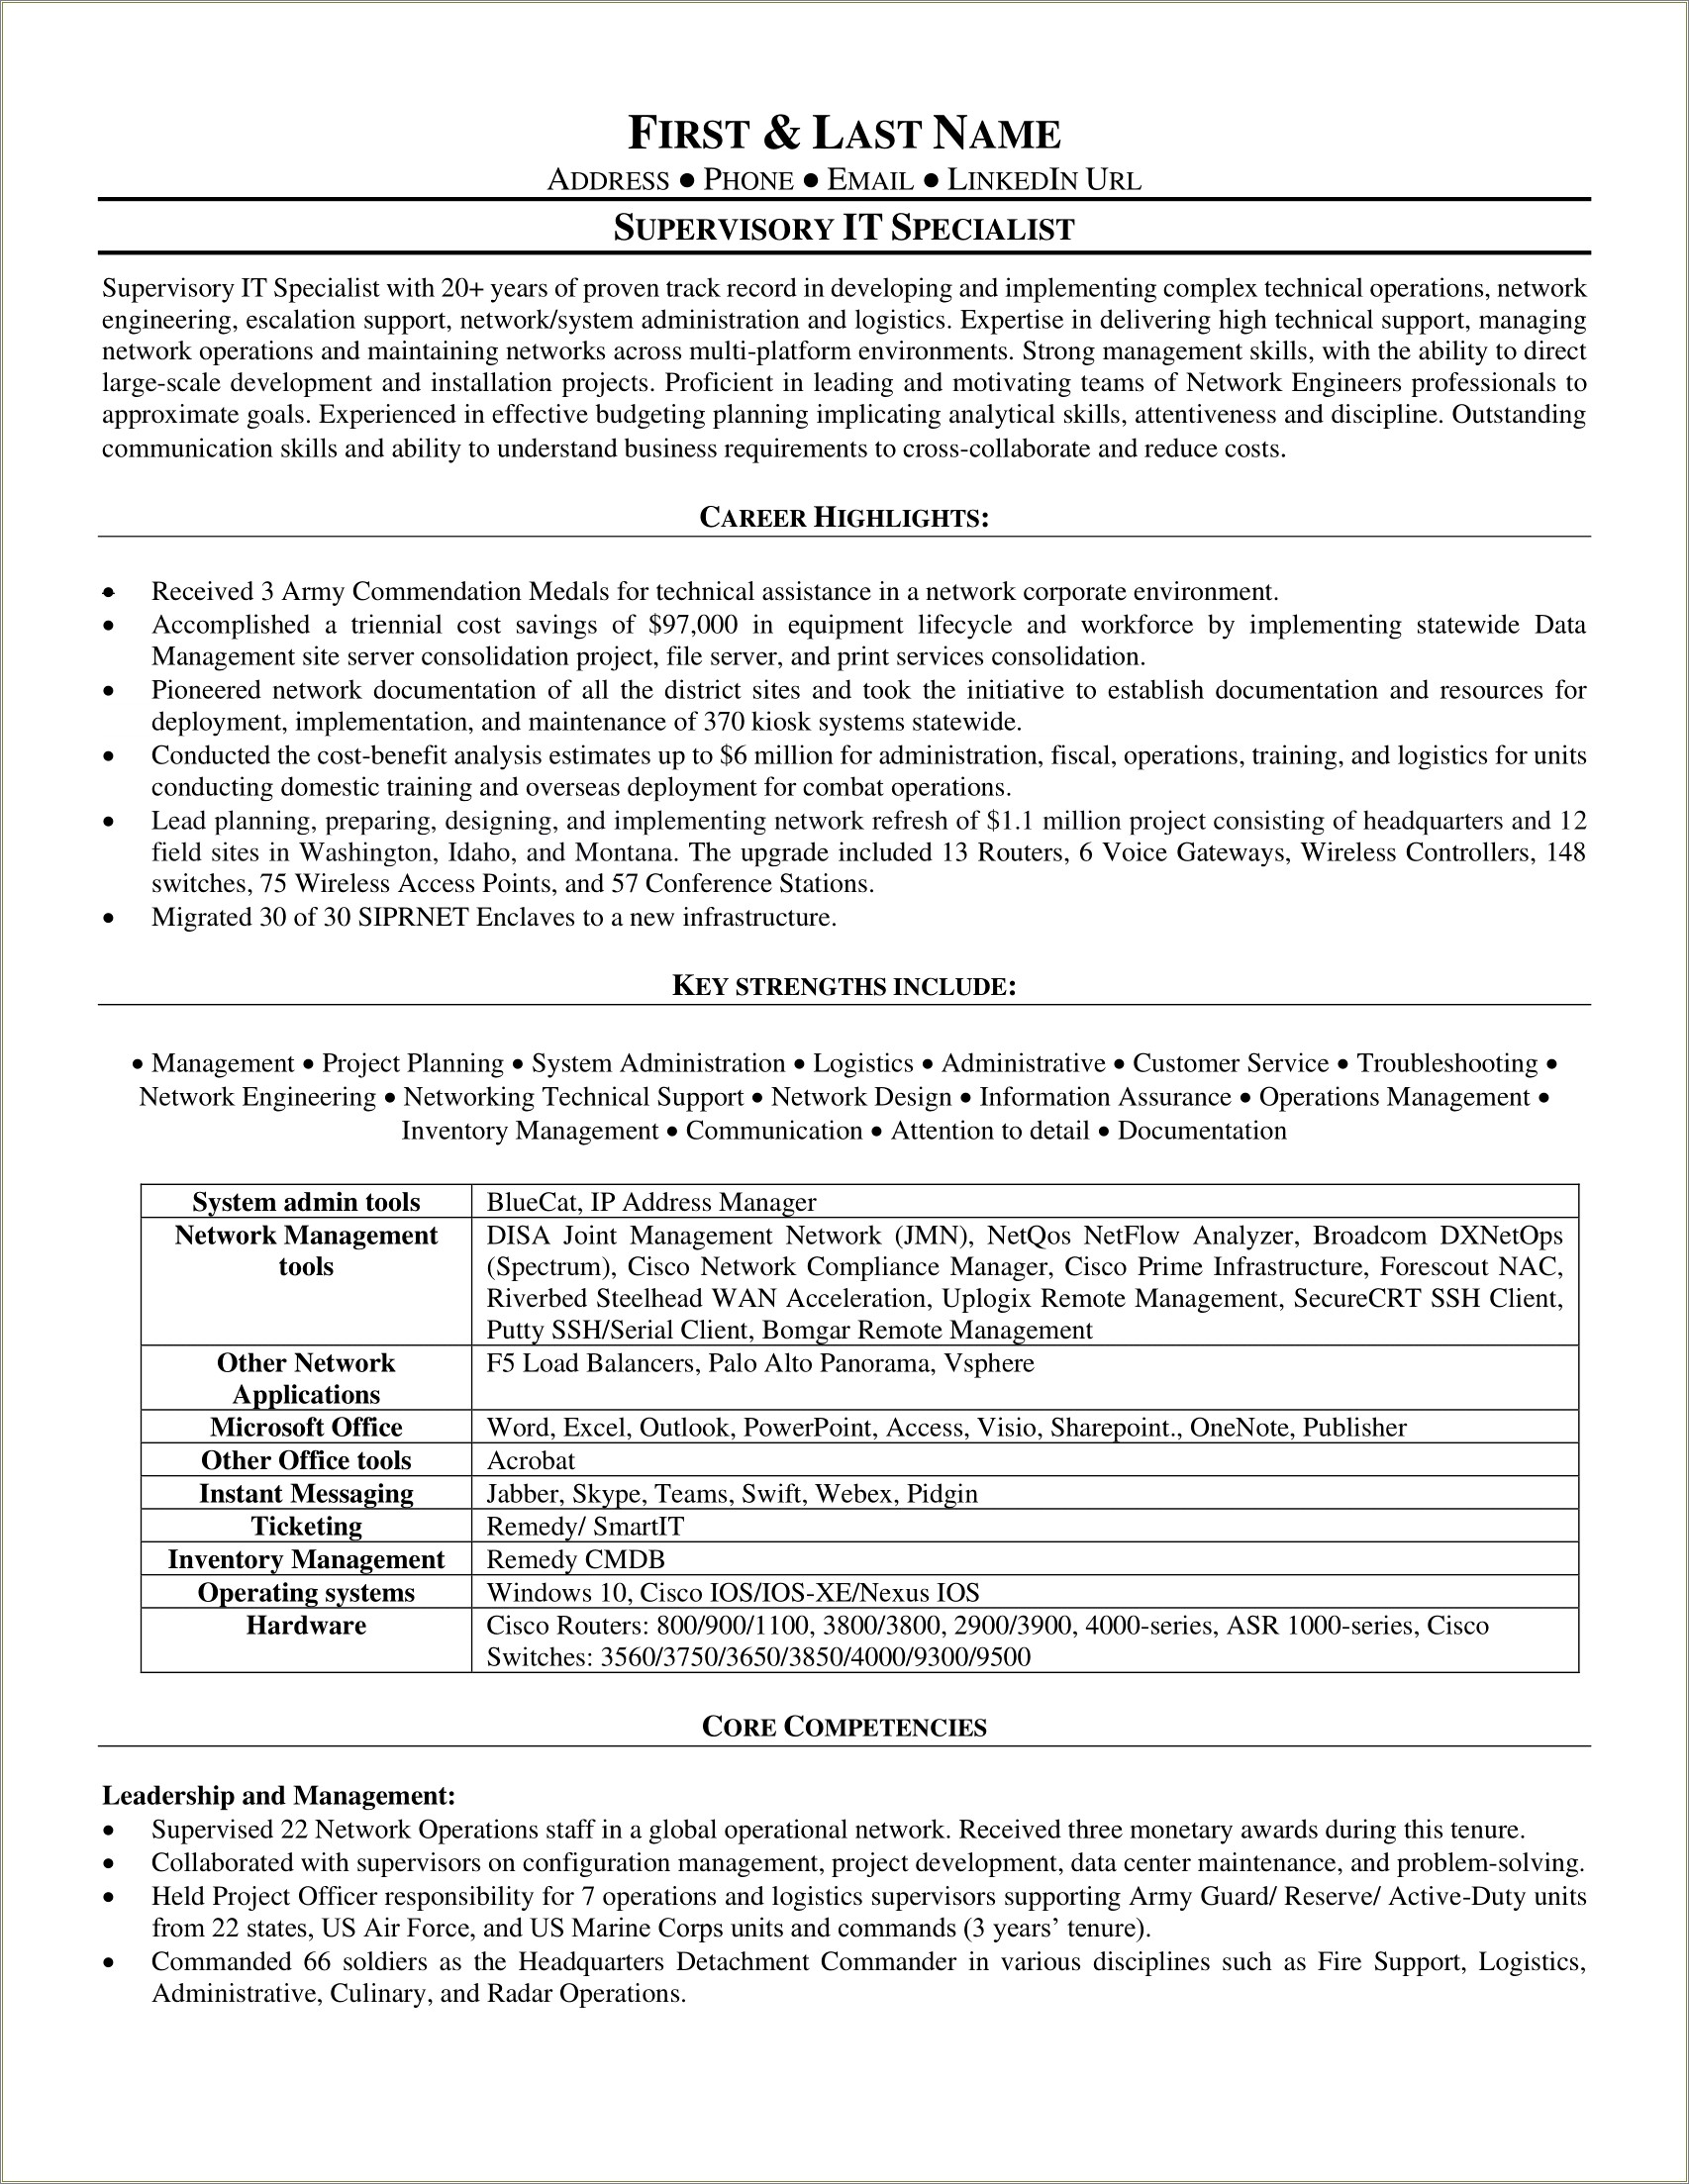 Sample Functional Resume For Military To Civilian